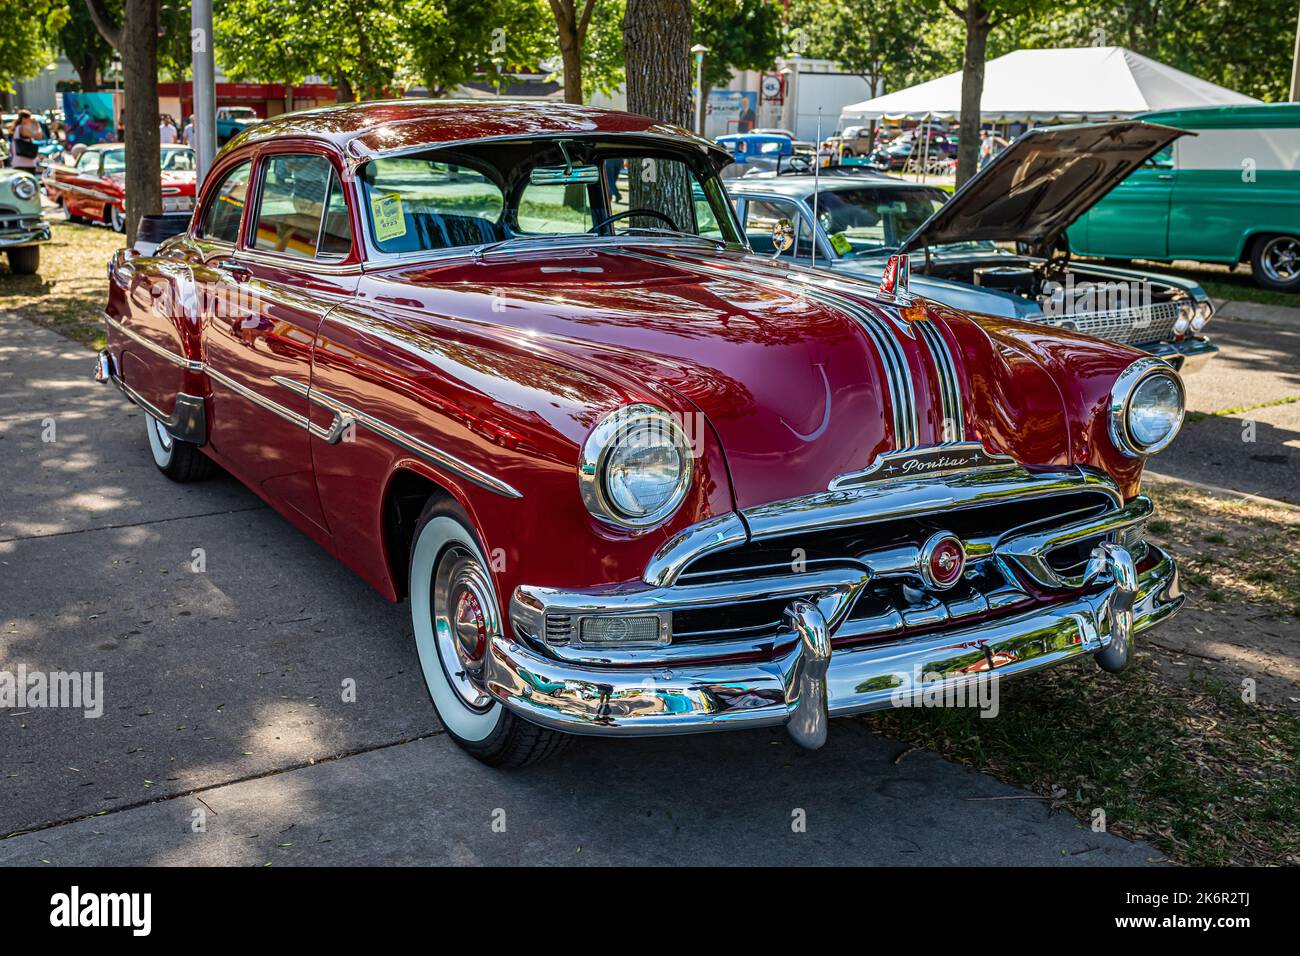 Falcon Heights, MN - June 19, 2022: High perspective front corner view of a 1953 Pontiac Chieftain 2 Door Sedan at a local car show. Stock Photo